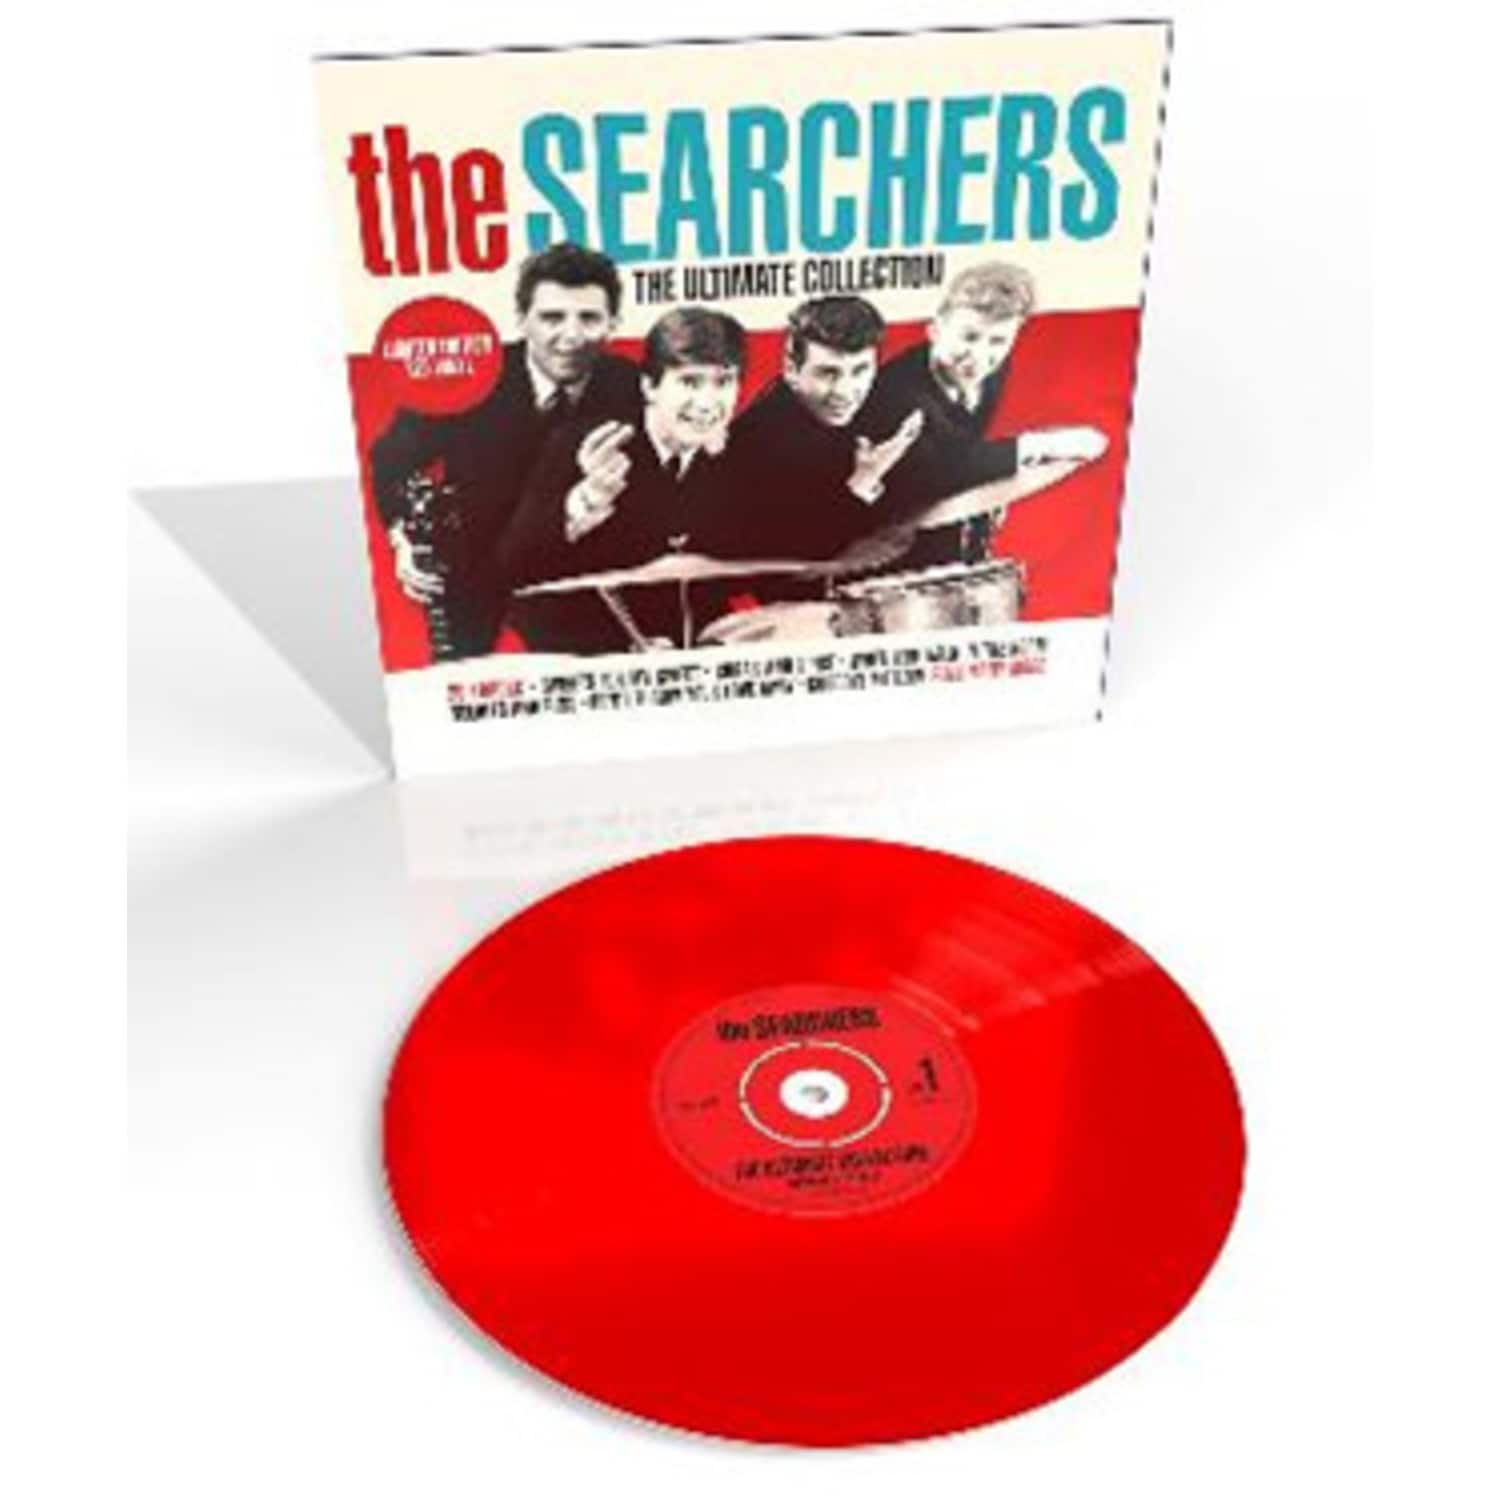 The Searchers - THE ULTIMATE COLLECTION 